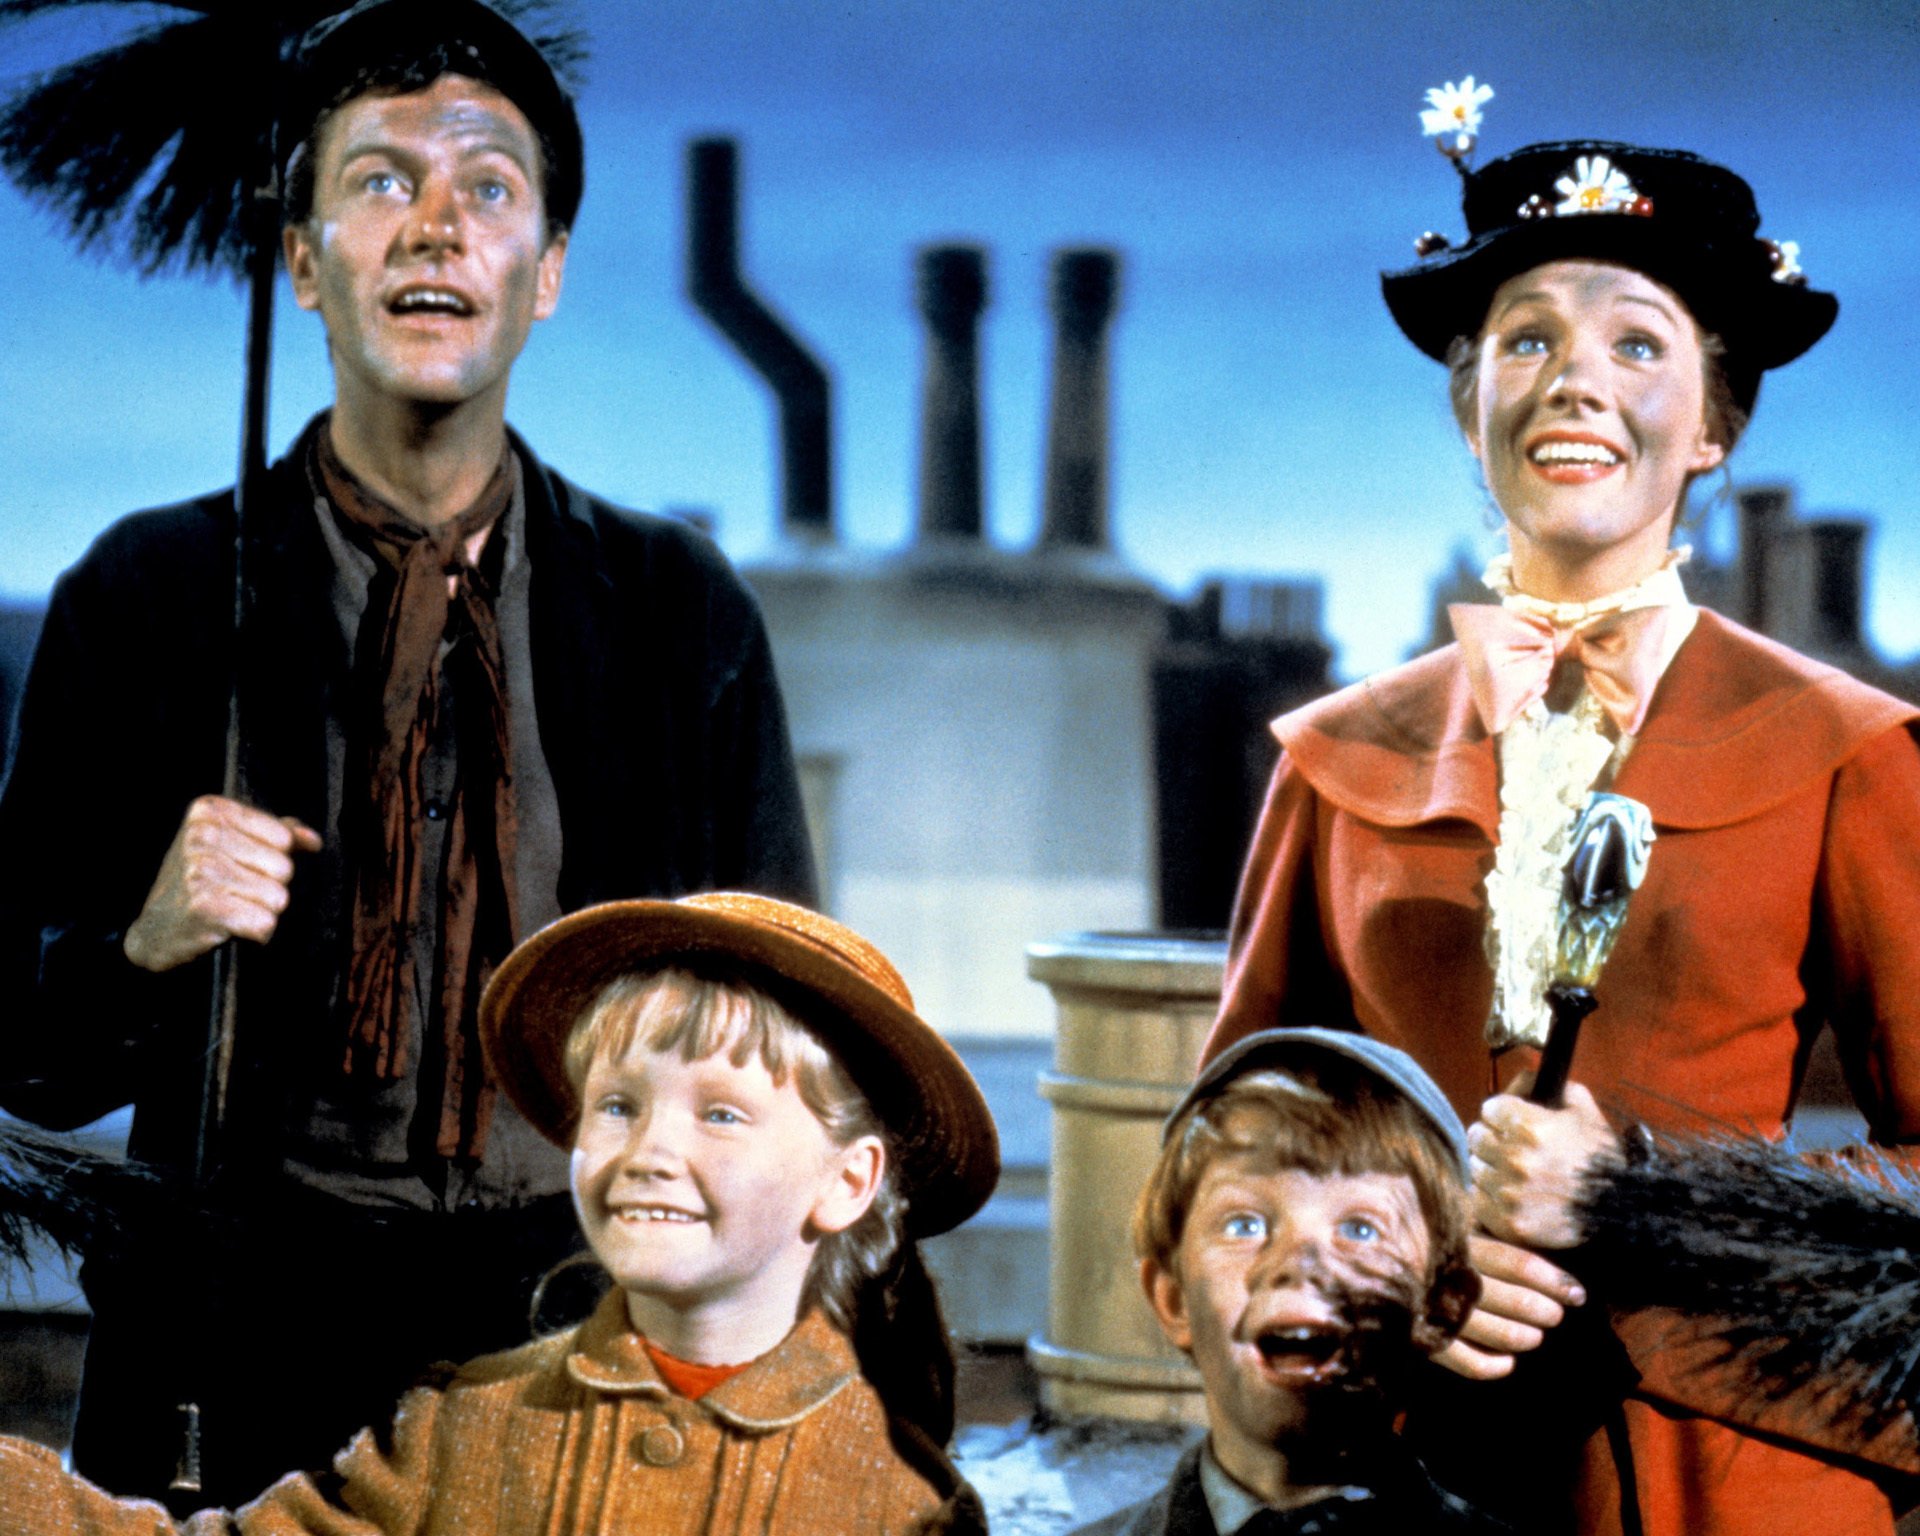 Dick Van Dyke and Julie Andrews as Bert and Mary Poppins in "Mary Poppins."